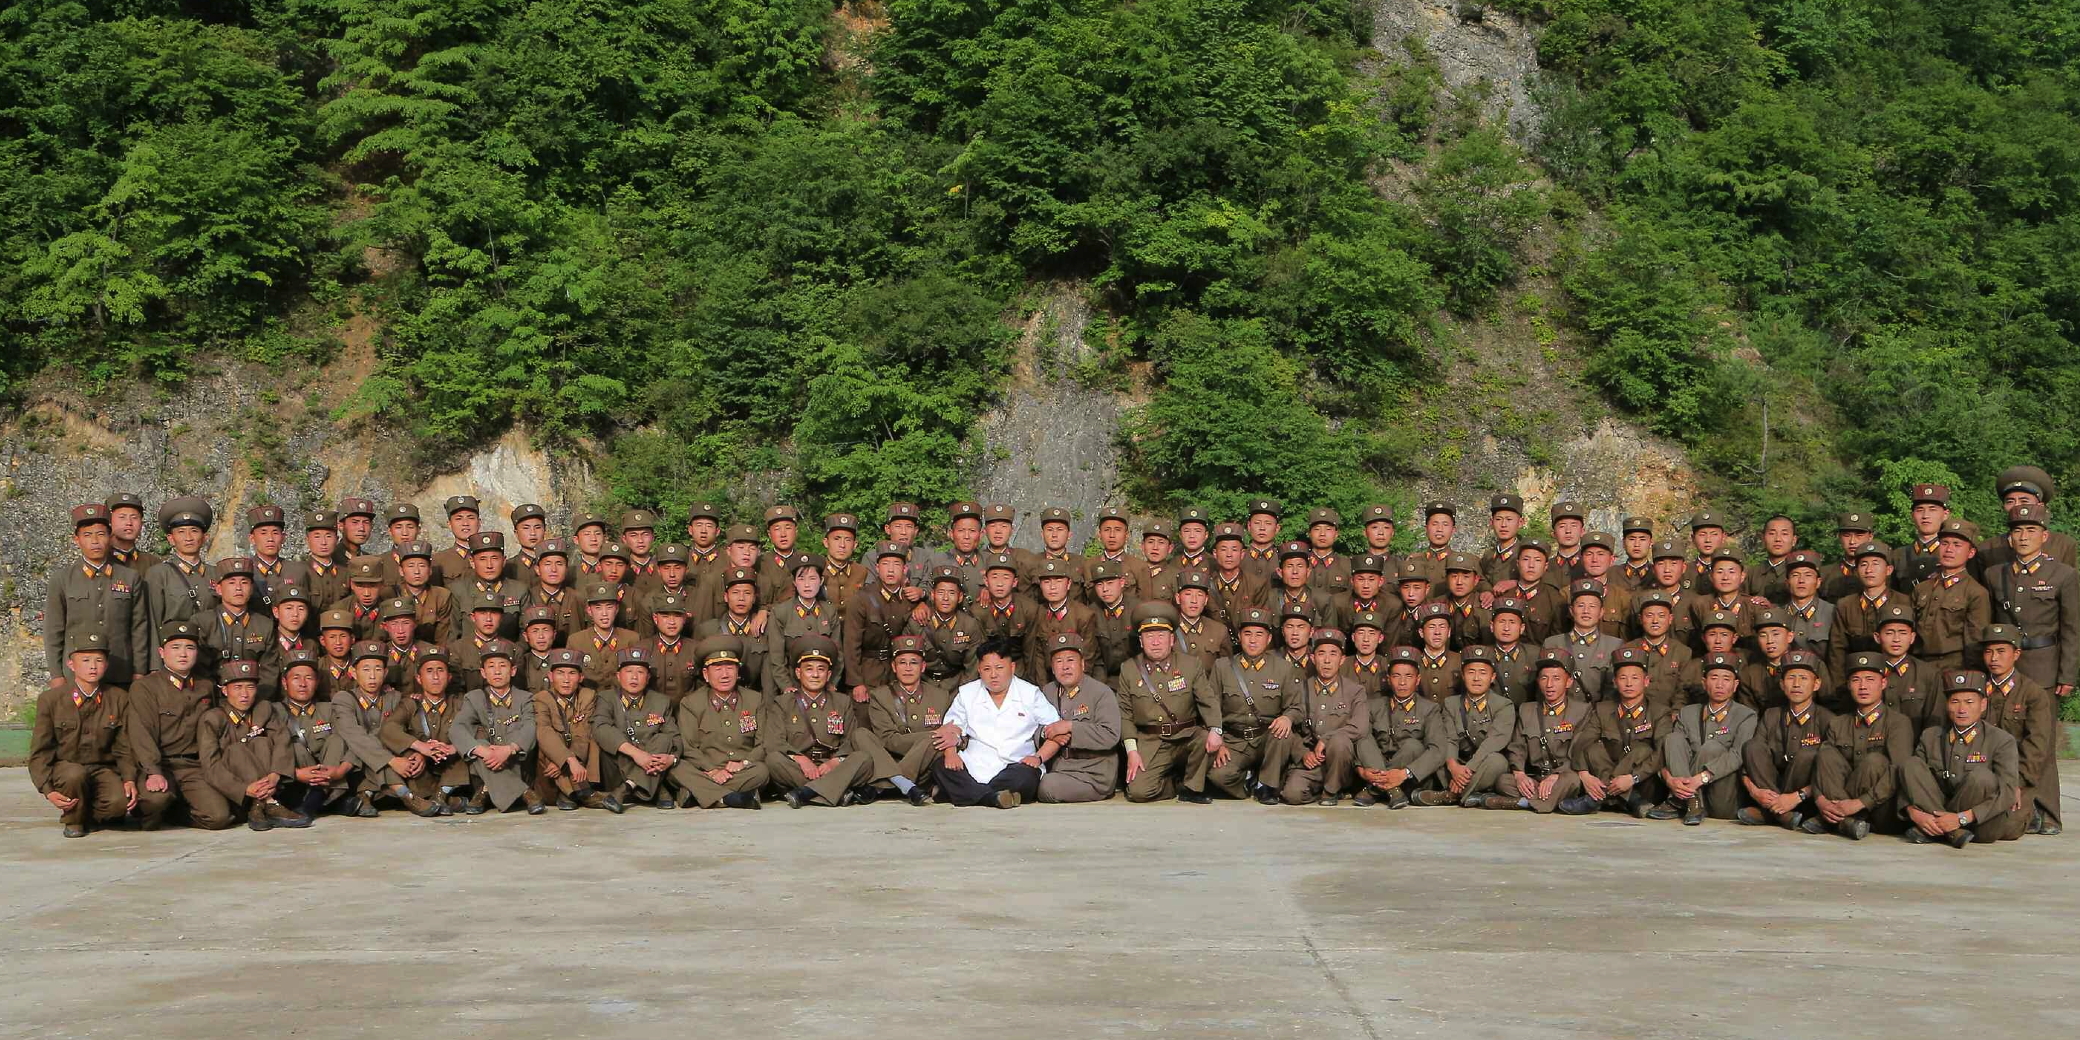 Kim Jong Un poses for a commemorative photo with participants in the KPA Strategic Rocket Force's 29 June 2014 drill that used two short-range Scud missiles (Photo: Rodong Sinmun).